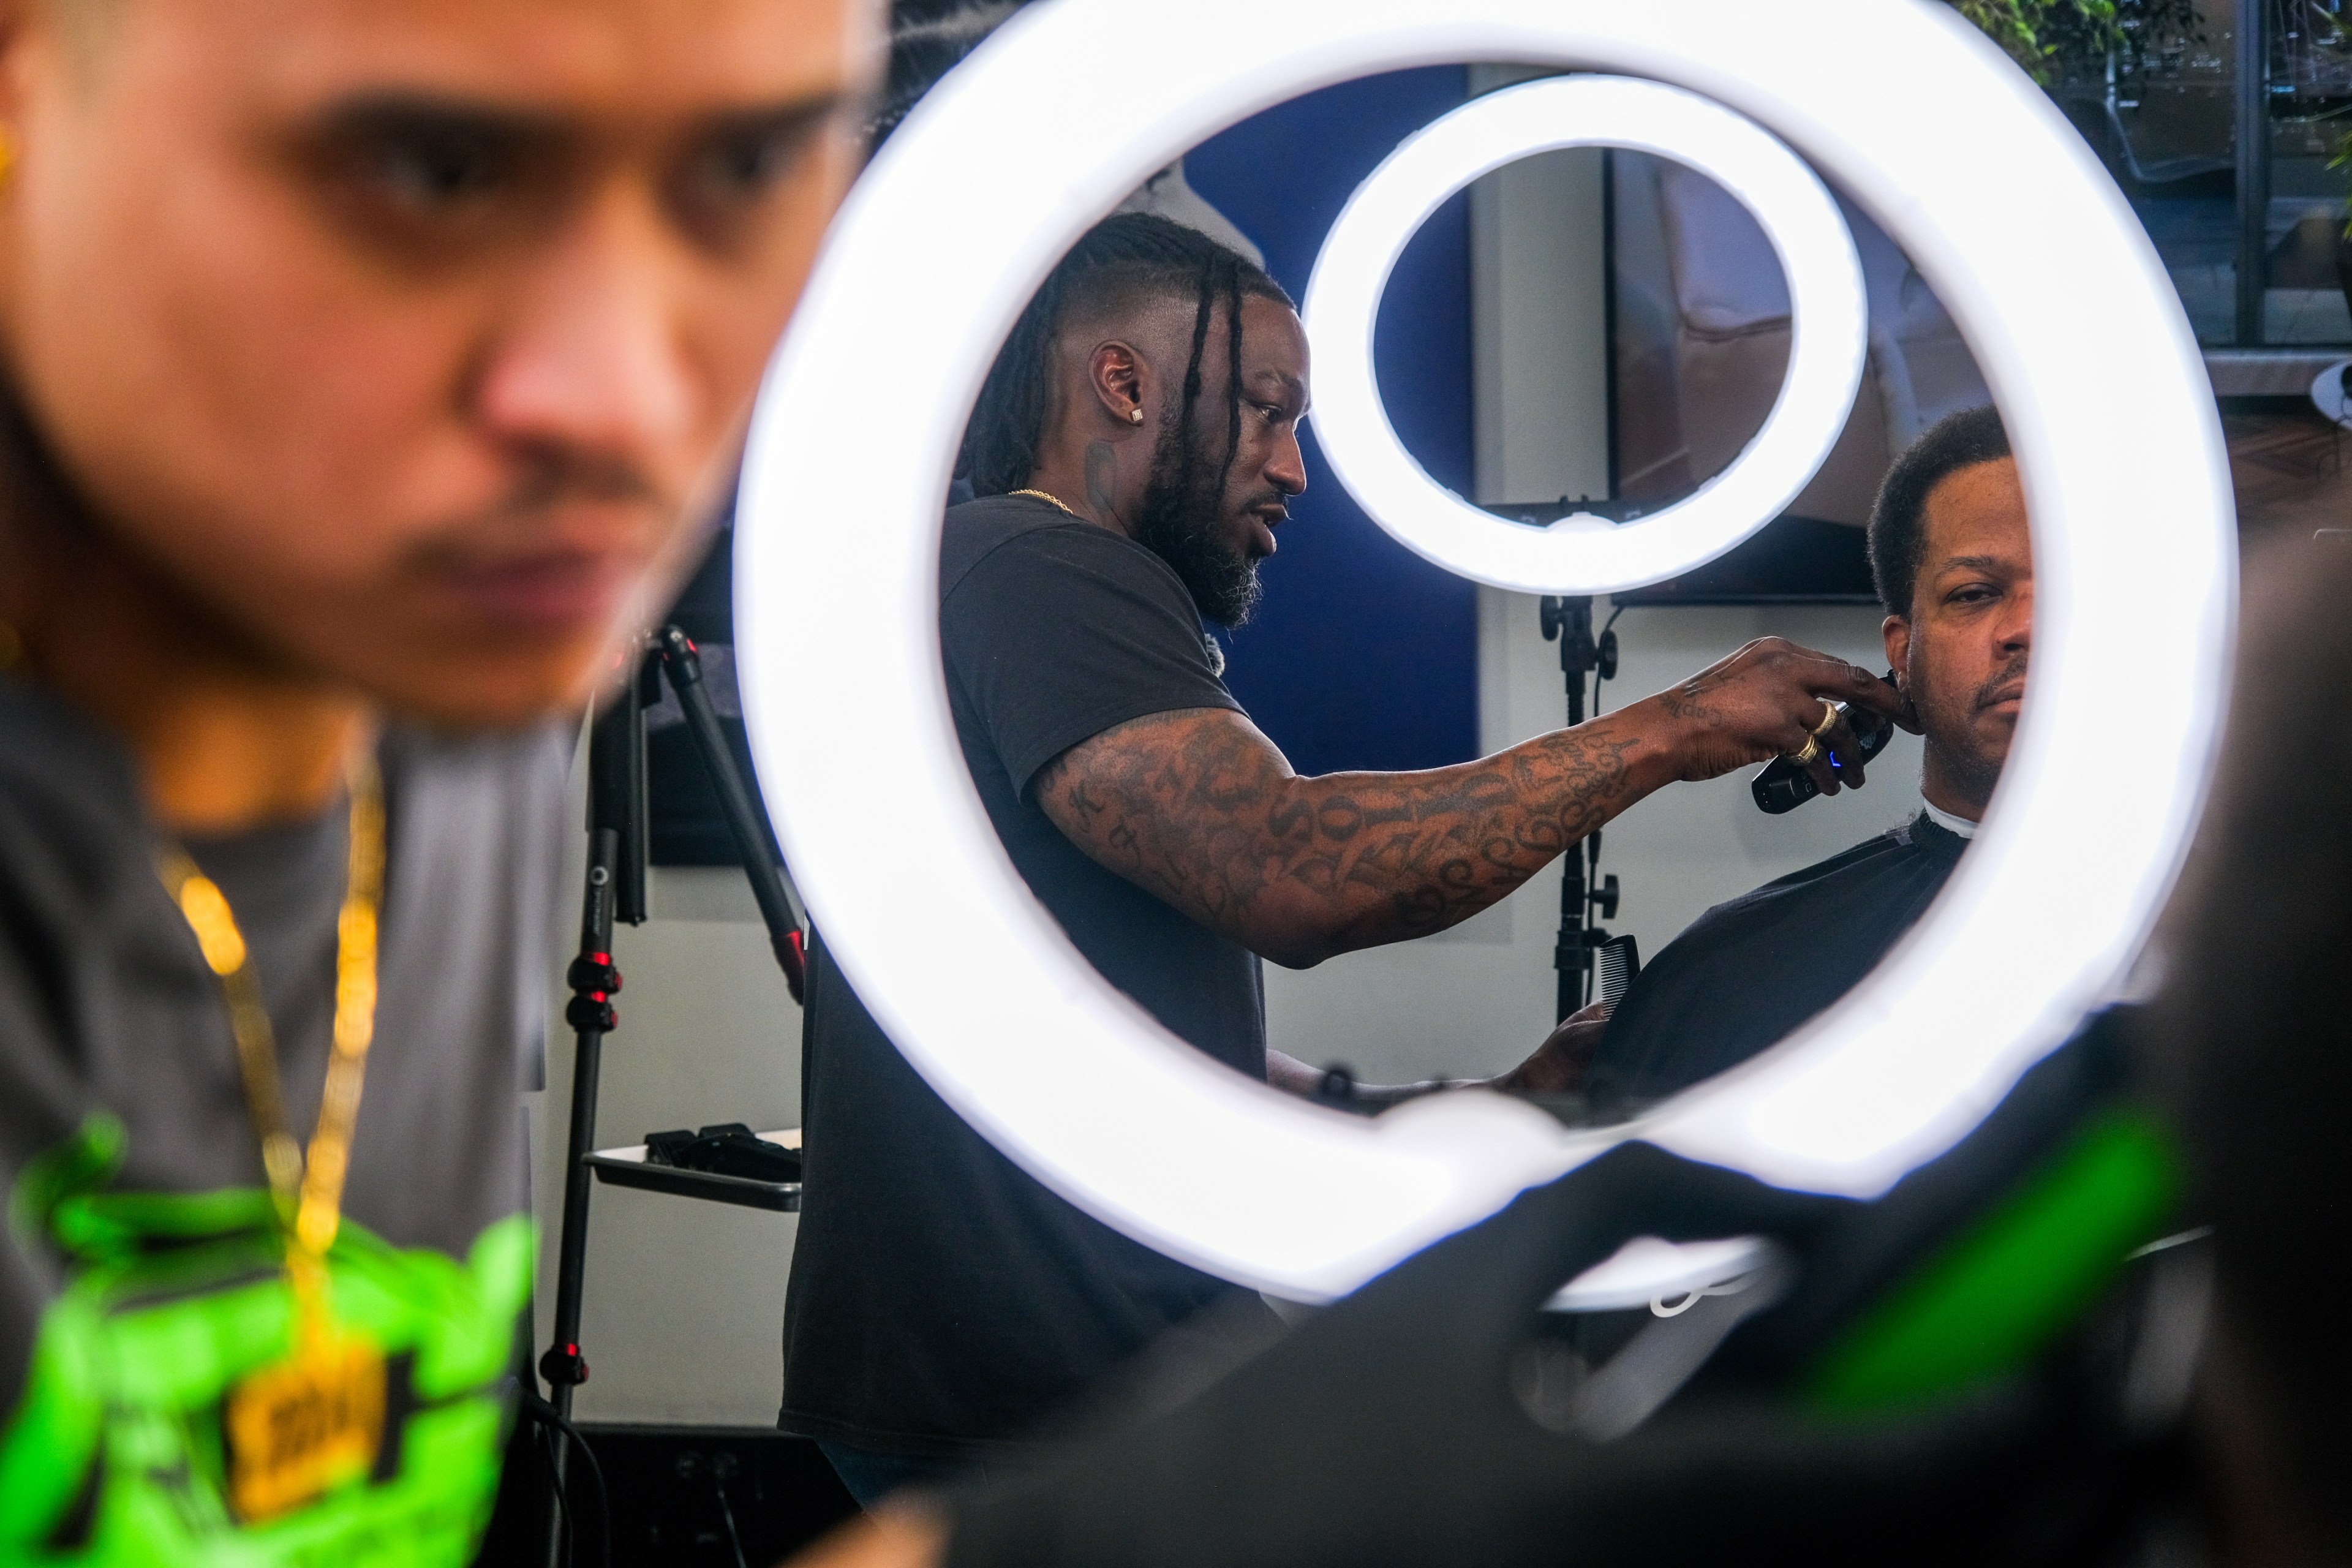 A barber with tattoos gives a haircut, framed by a ring light; another person in foreground, out of focus.